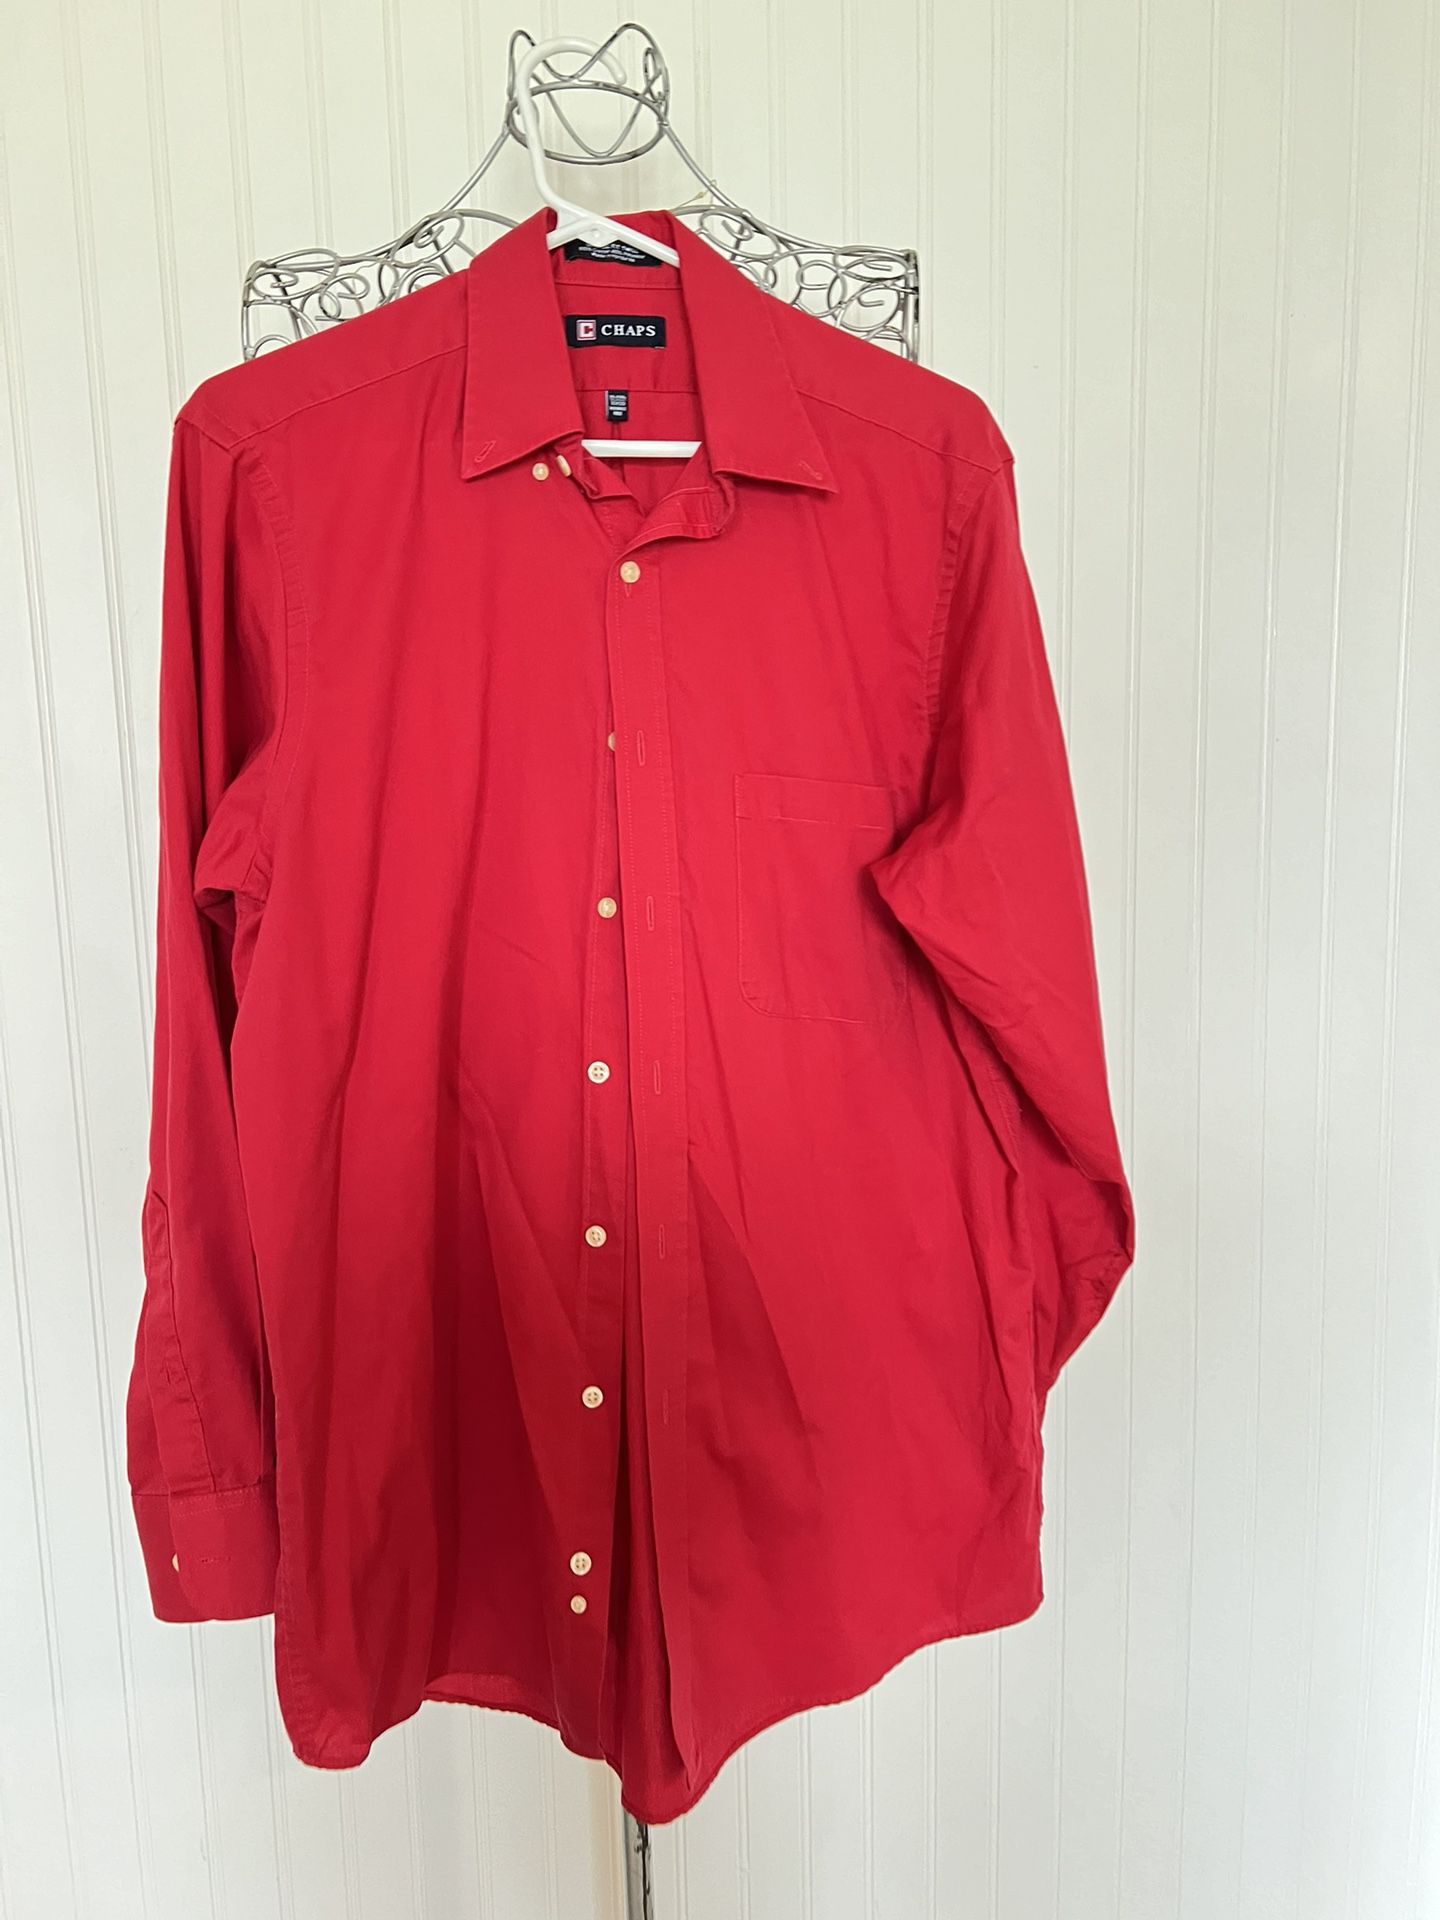 Chaps Men's Button Down Long Sleeve Shirt  Easy Care red Solid   15-15½ 32/33